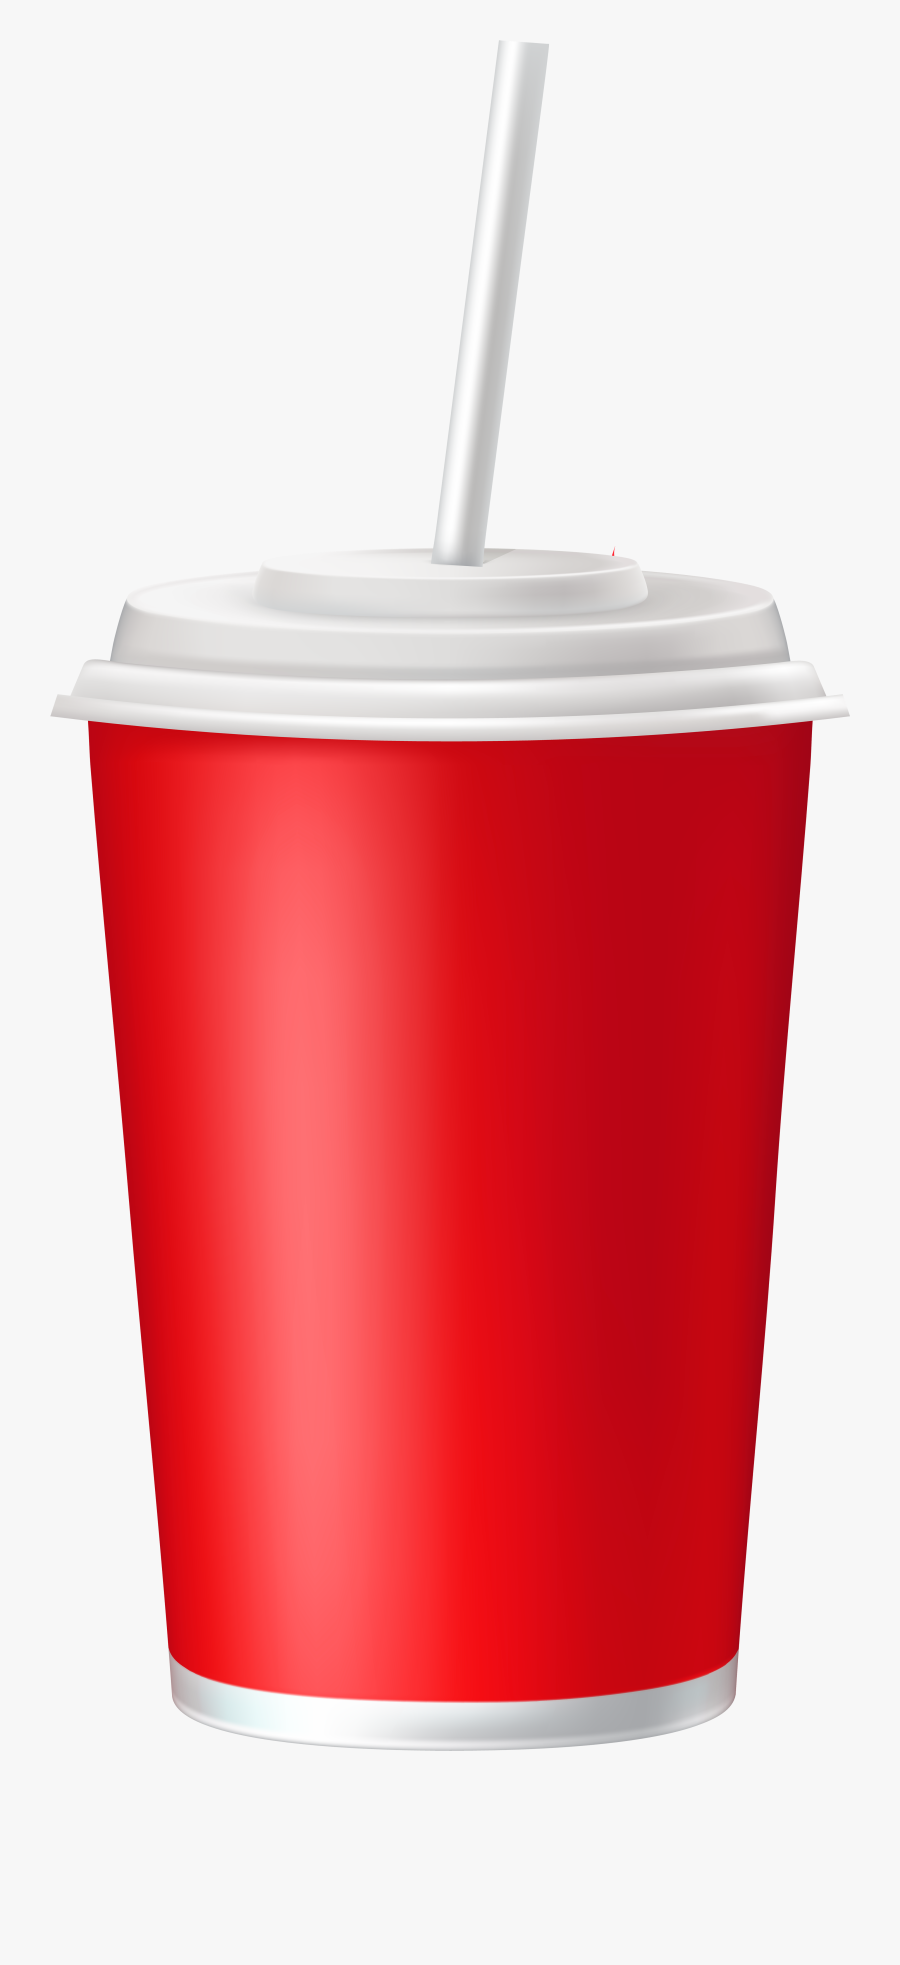 Cup And Straw Png Clipart, Transparent Clipart